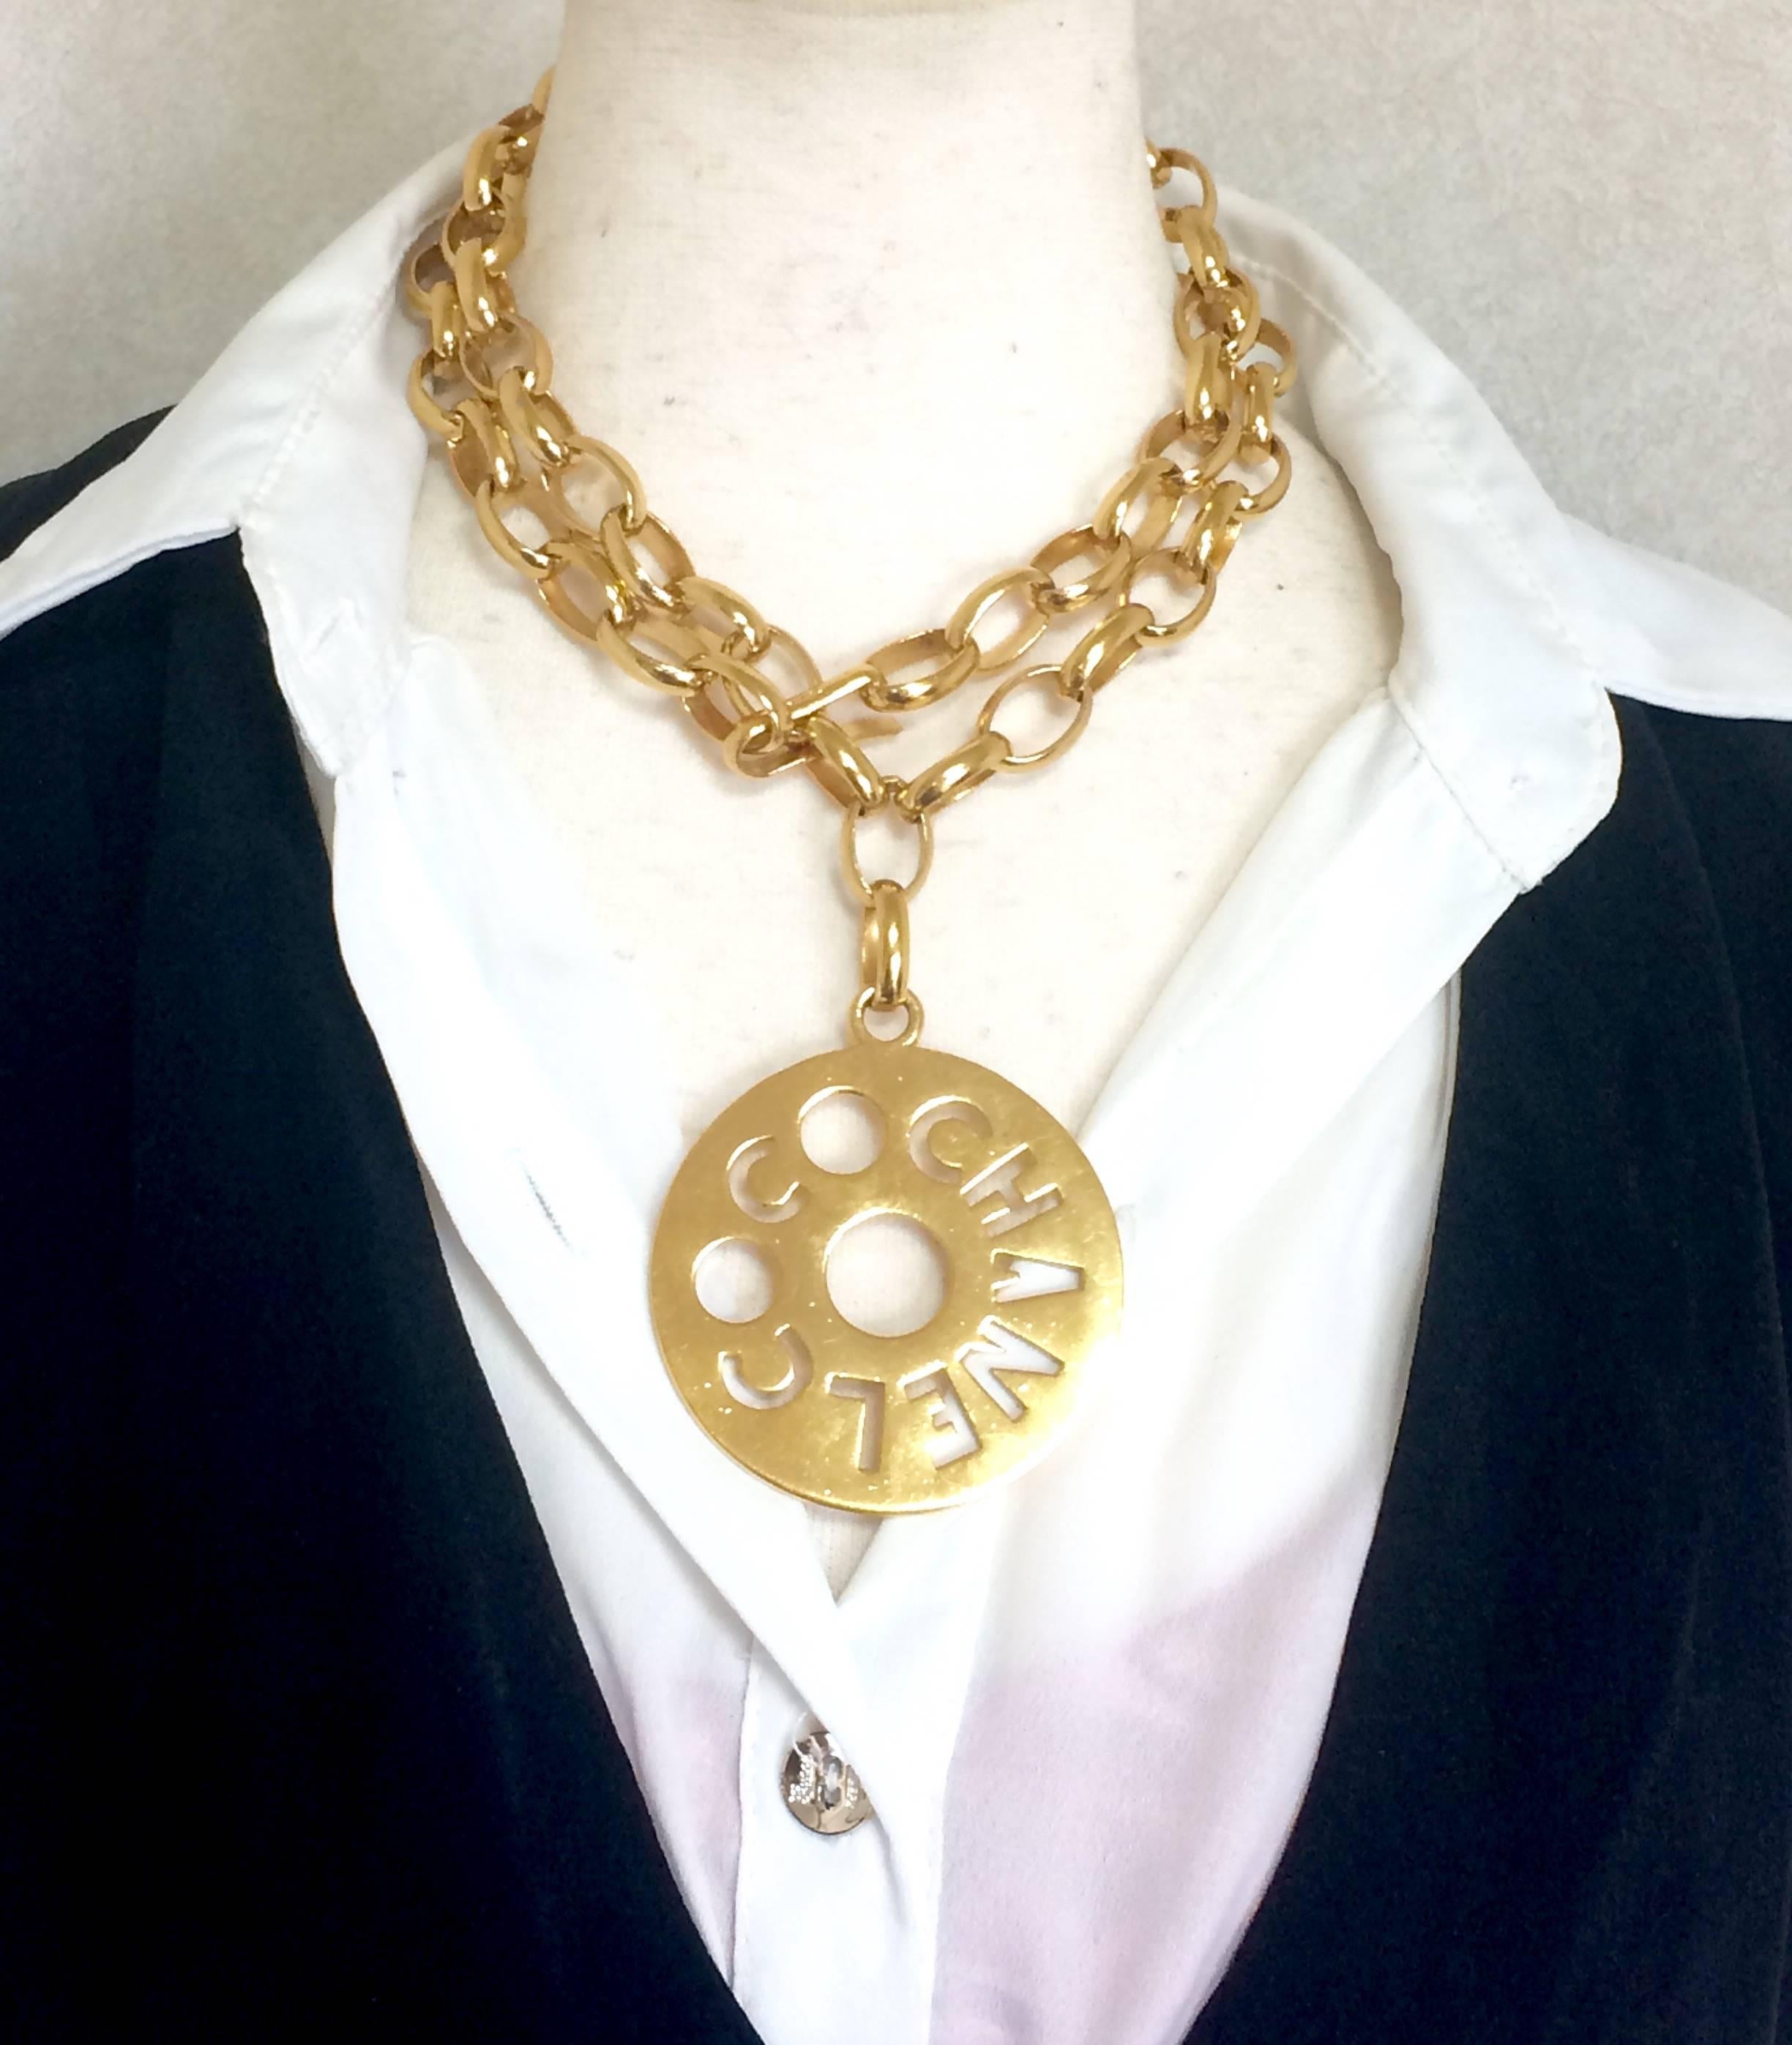 Vintage CHANEL golden chain necklace, chain belt with round logo COCO top. 5